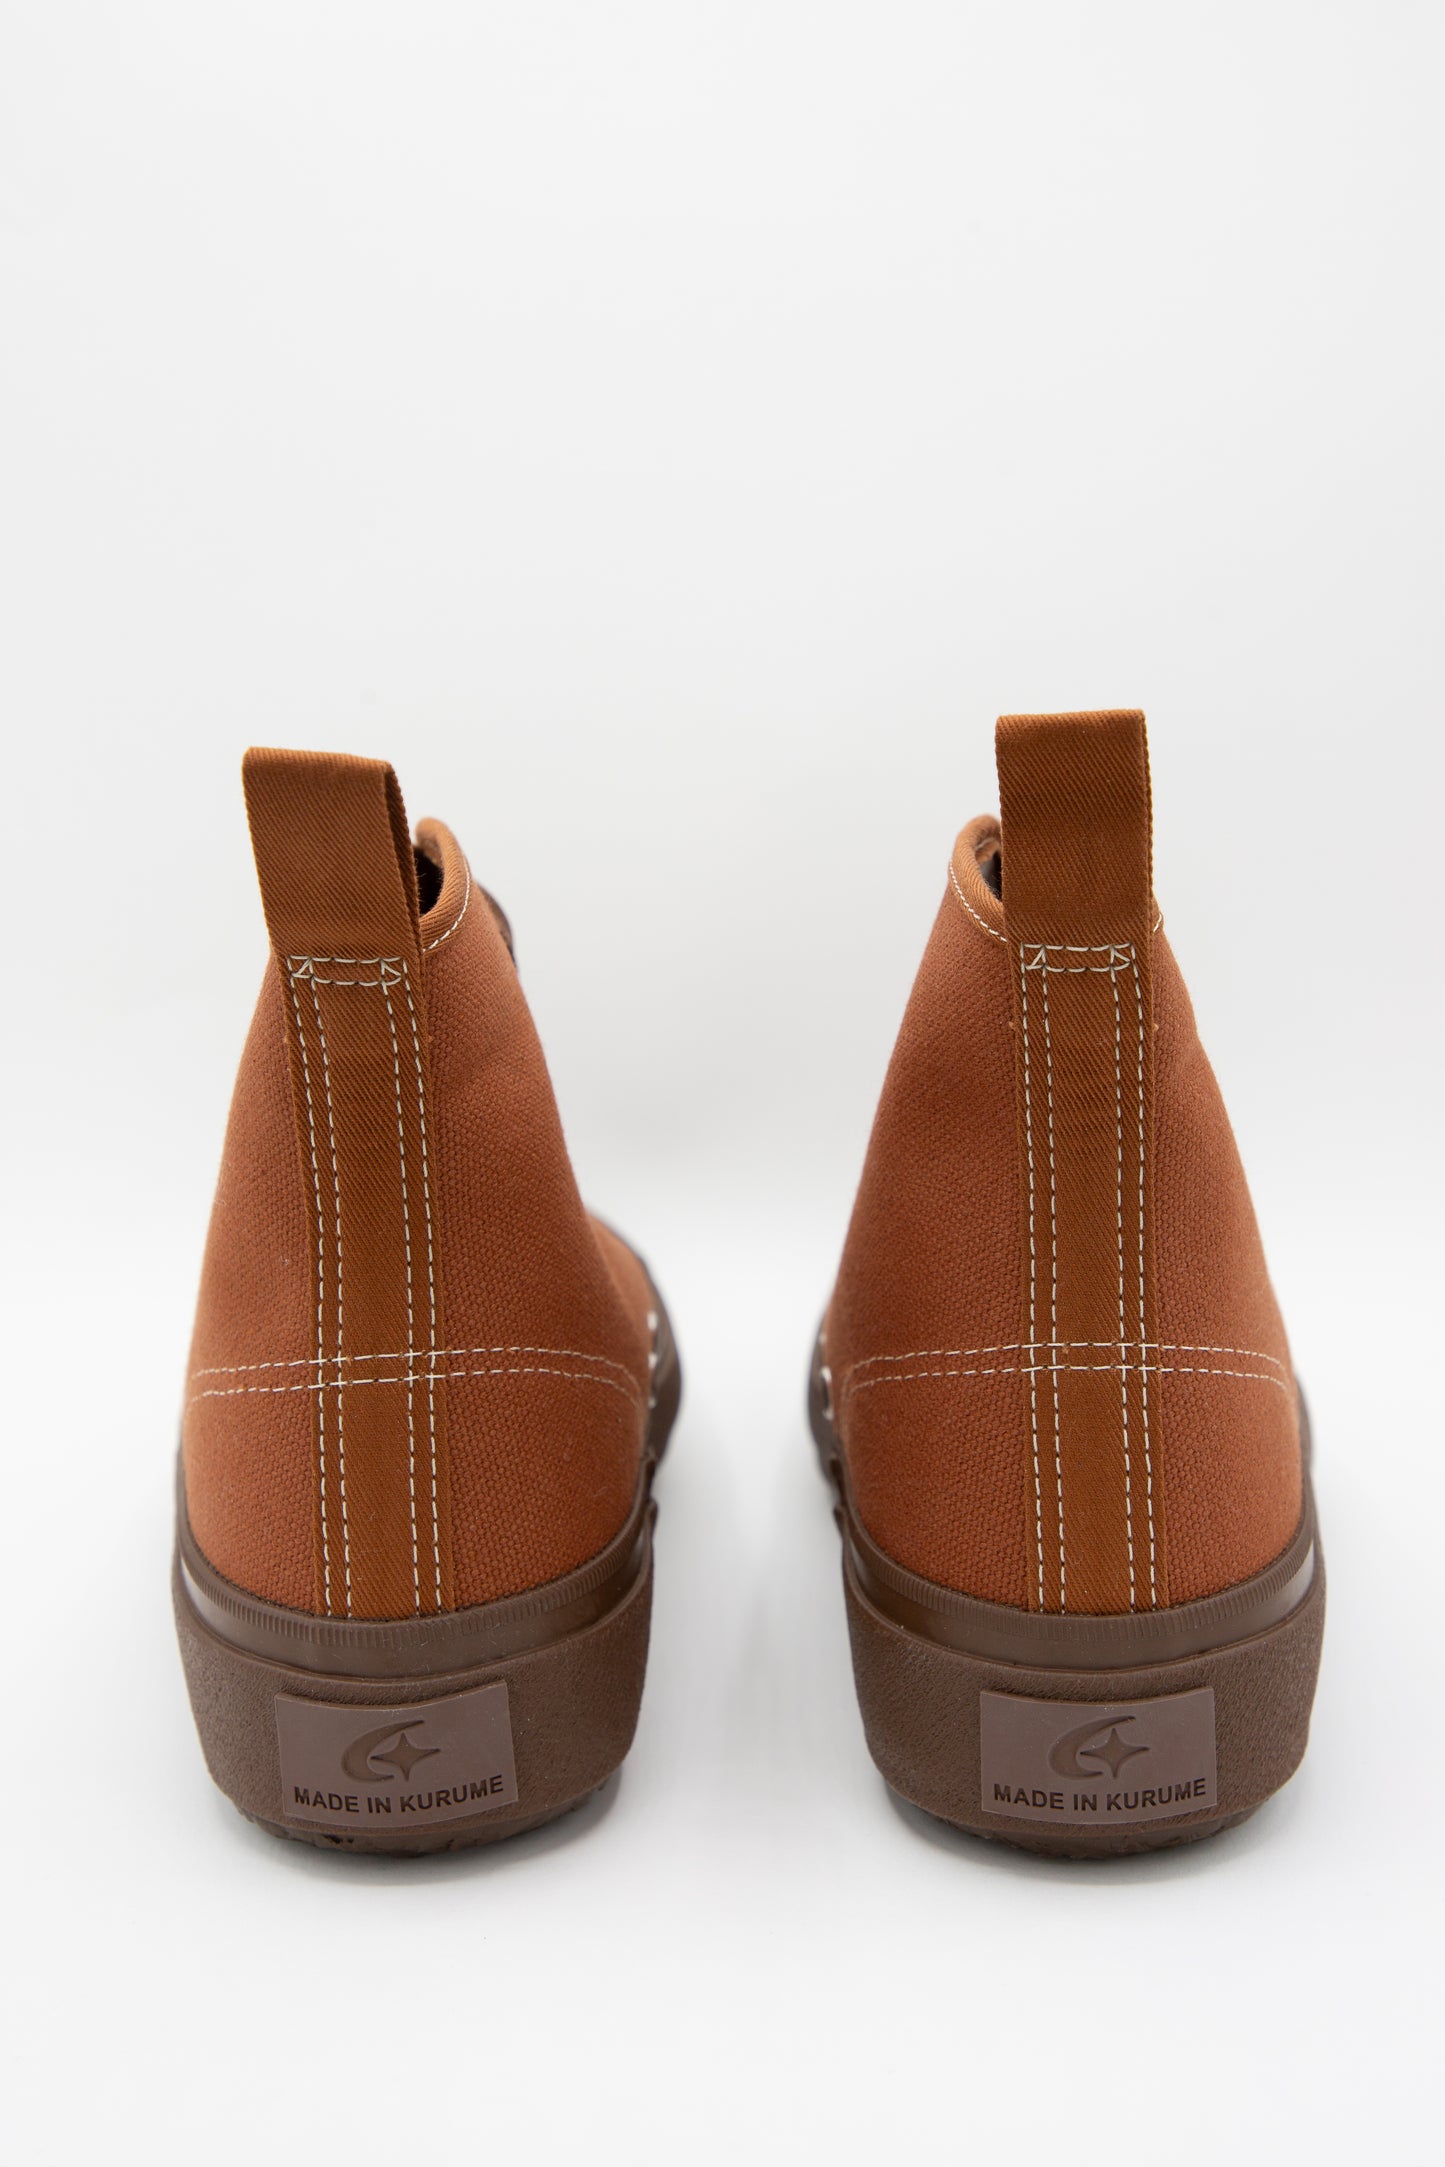 A pair of Hibasket Sneaker in Brown shoes with rubber soles, Moonstar.